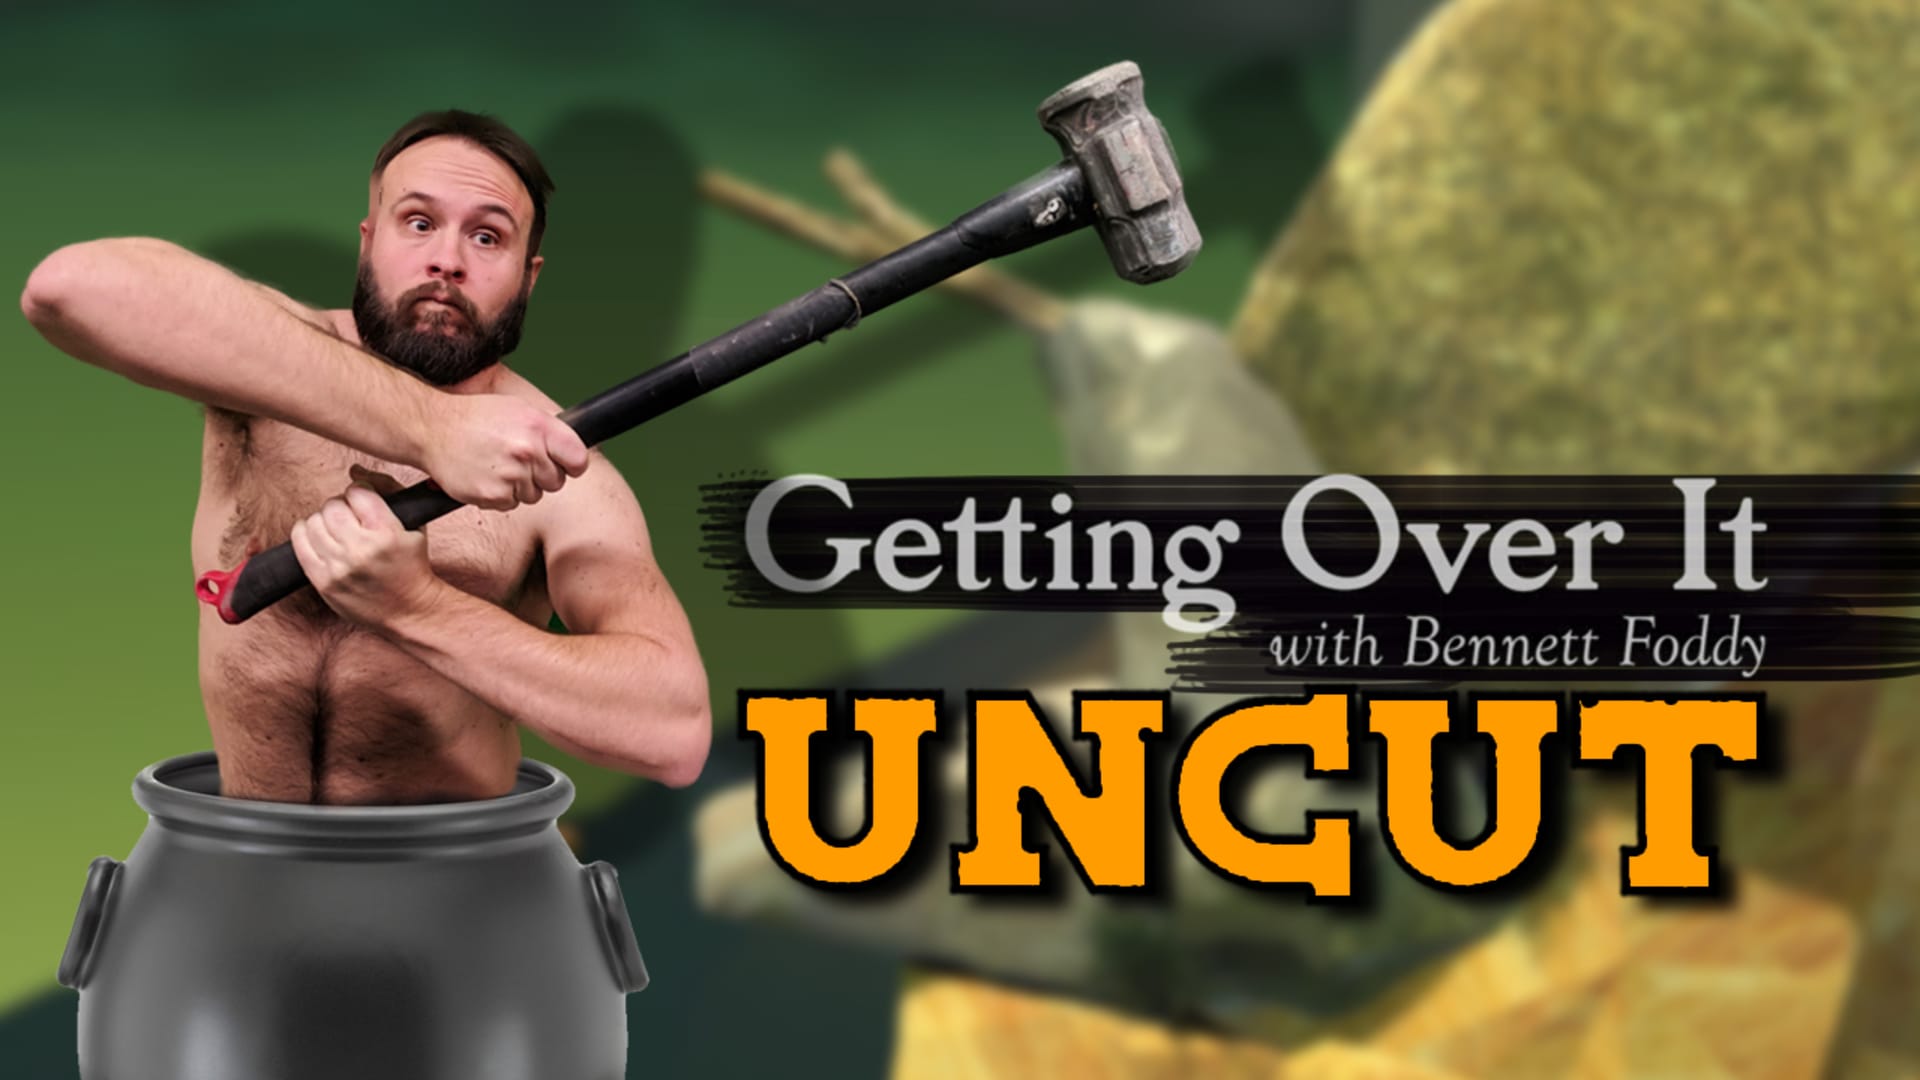 Getting Over It with Bennett Foddy Gameplay